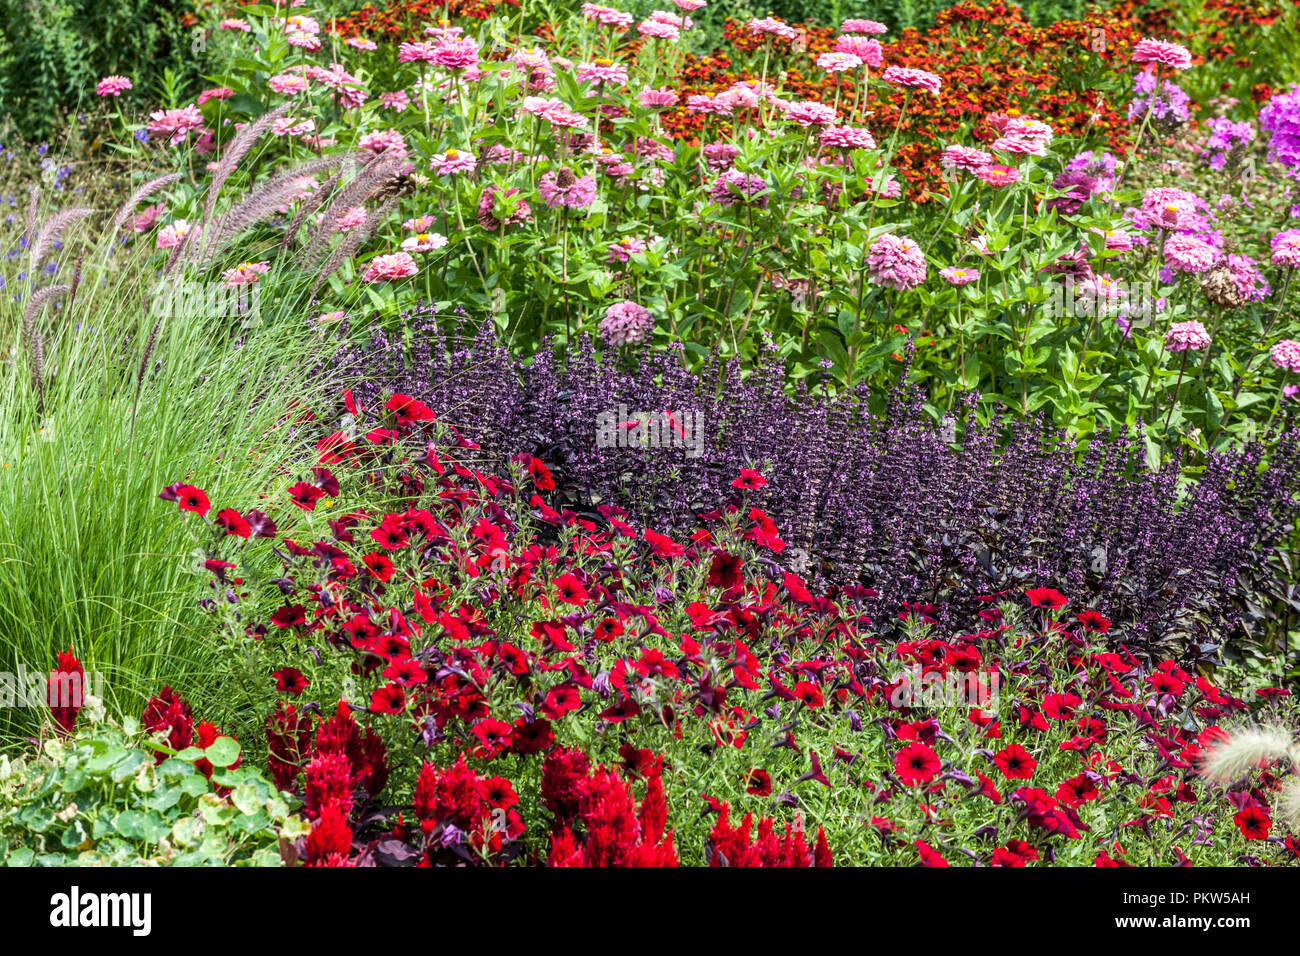 A colorful combination of summer flowers in cottage garden beds Stock Photo